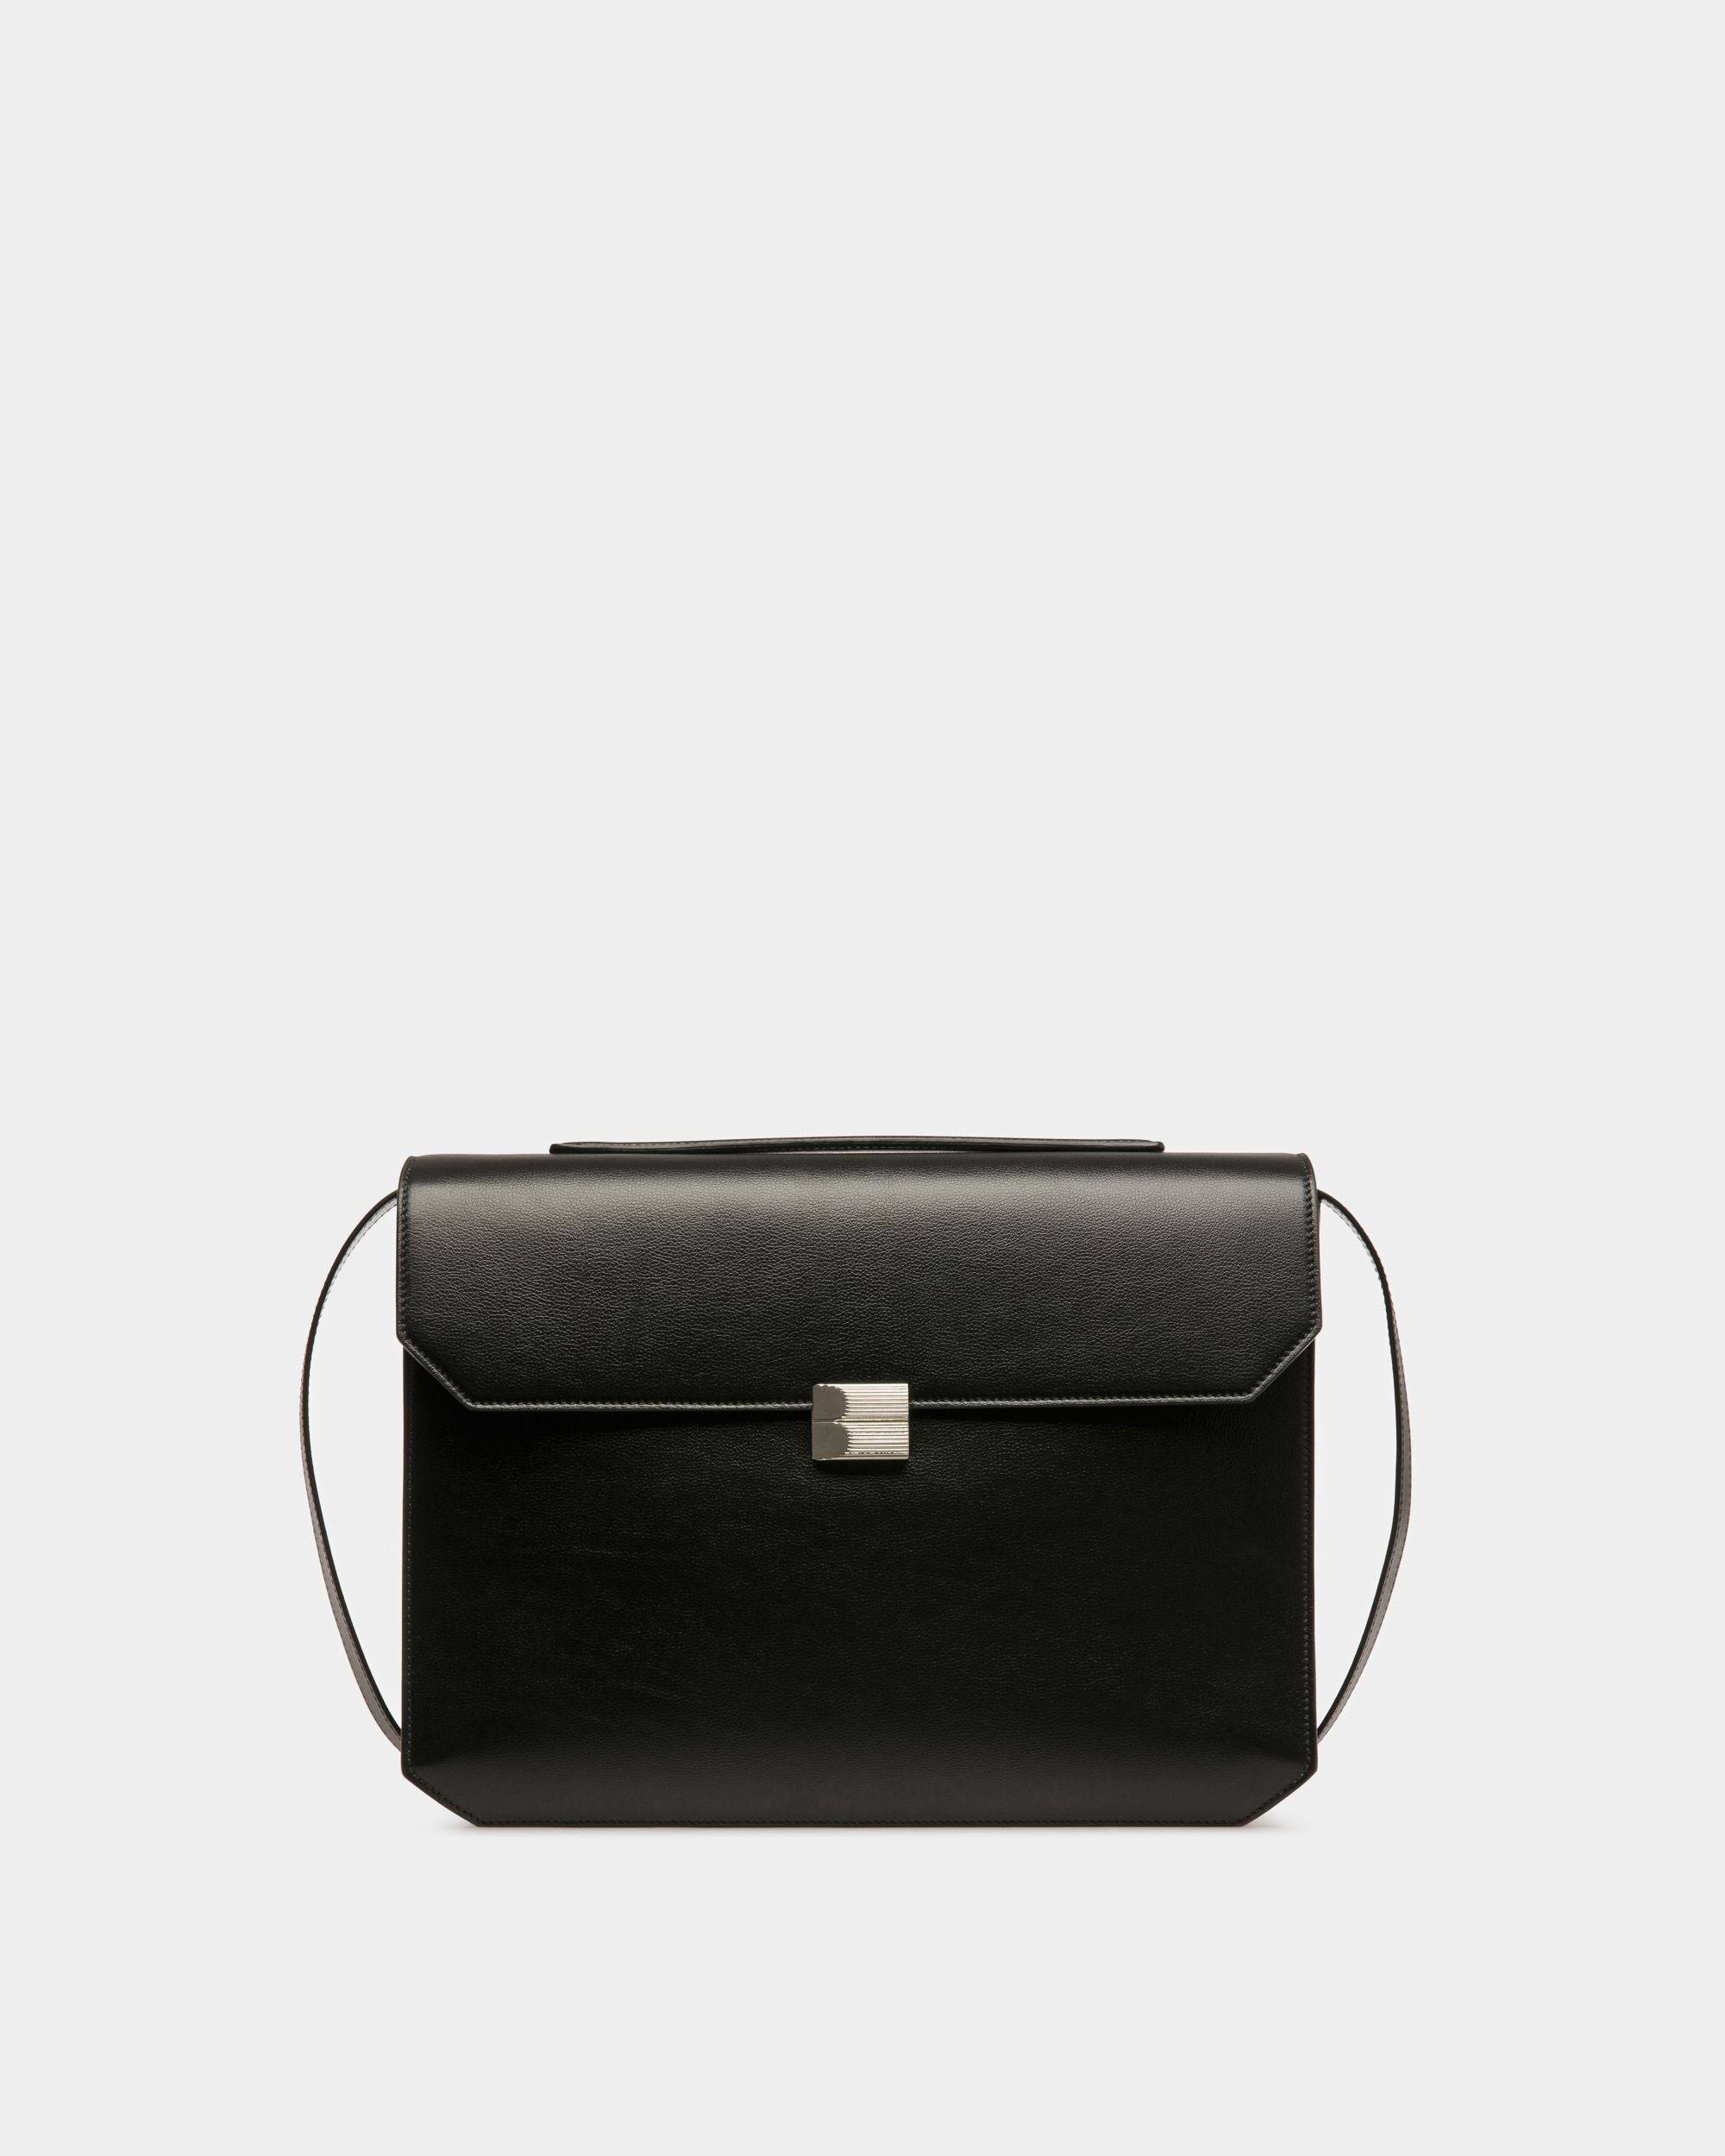 Packed | Men's Business Bag | Black Leather | Bally | Still Life Front